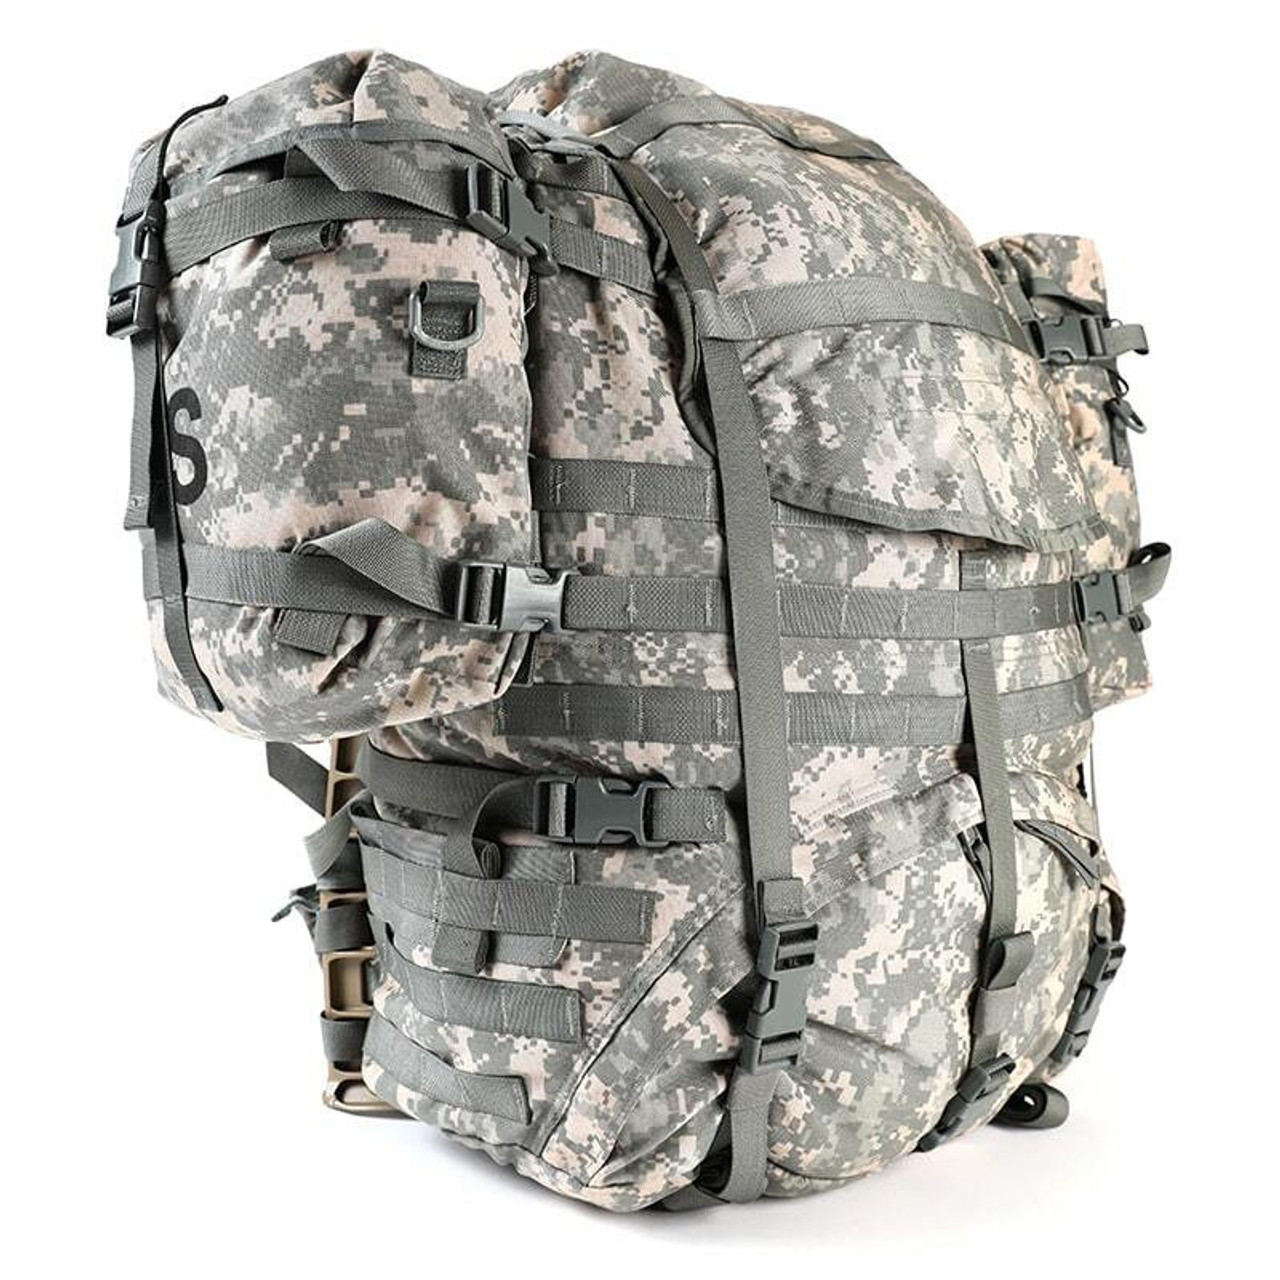 US Army Issue Surplus Rucksack II MOLLE | Military